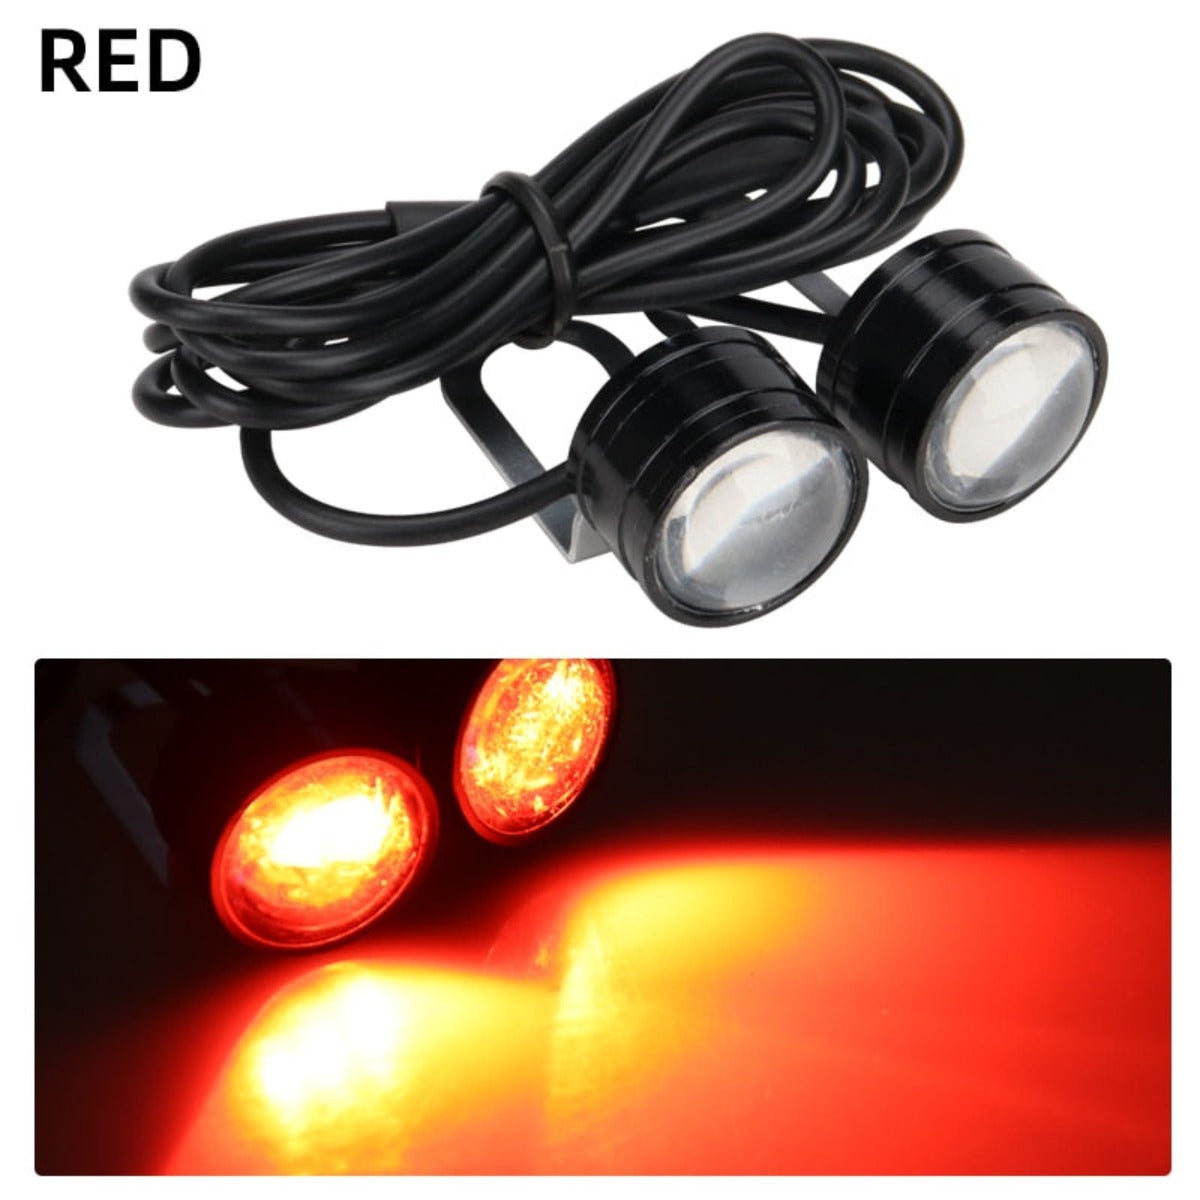 Enhance motorcycle visibility with a pair of Motorcycle Strobe LED Driving Lights designed for safety.